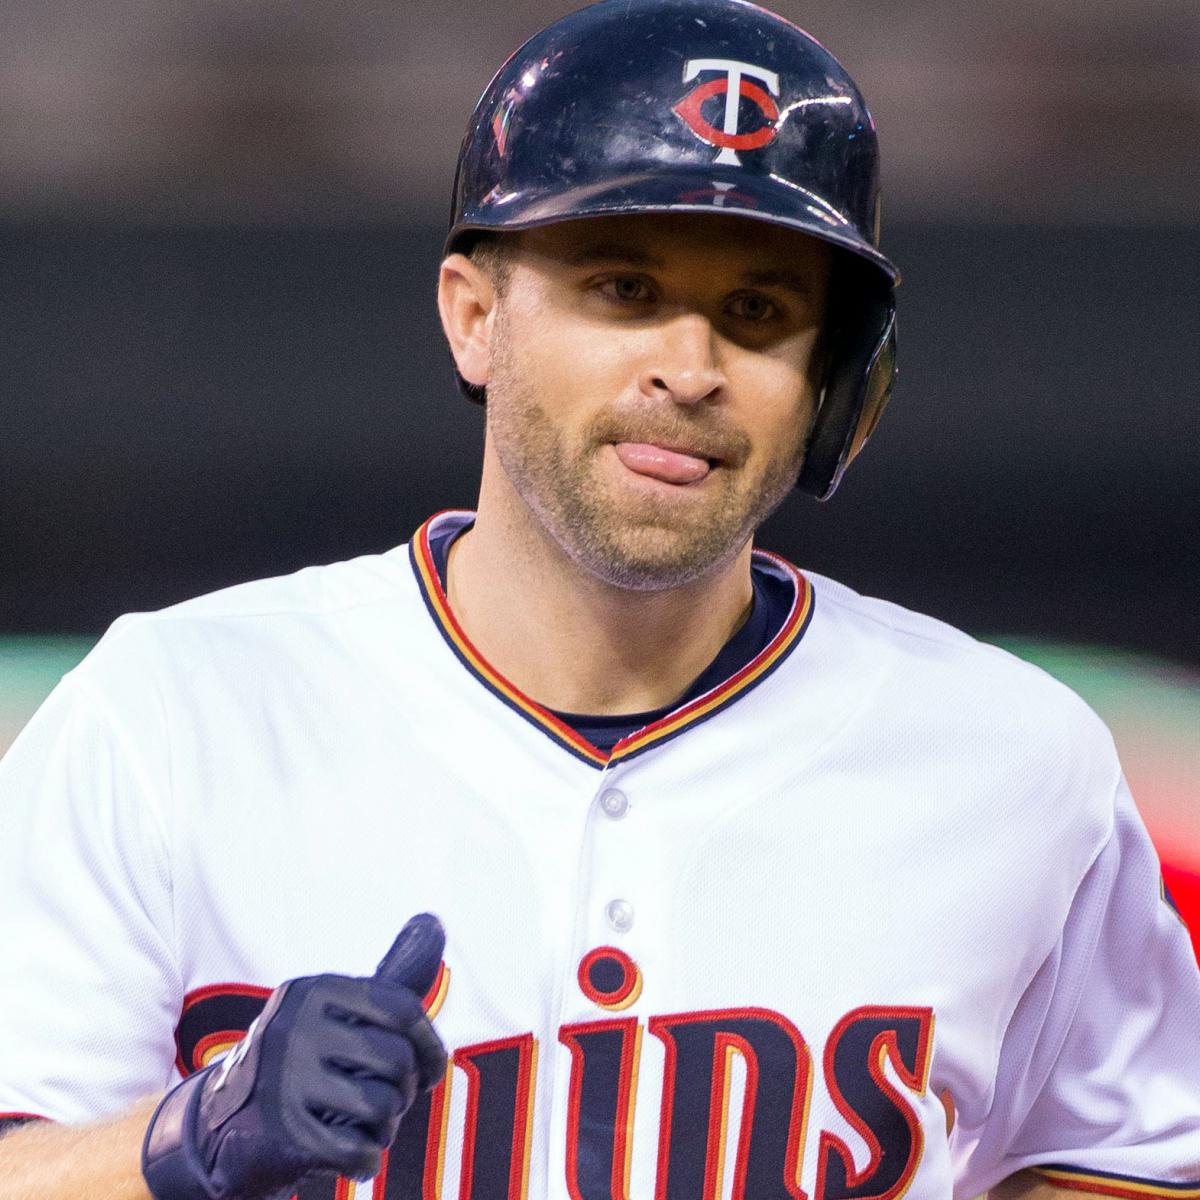 Brian Dozier Trade Rumors: Latest News and Speculation on Twins 2B | Bleacher Report ...